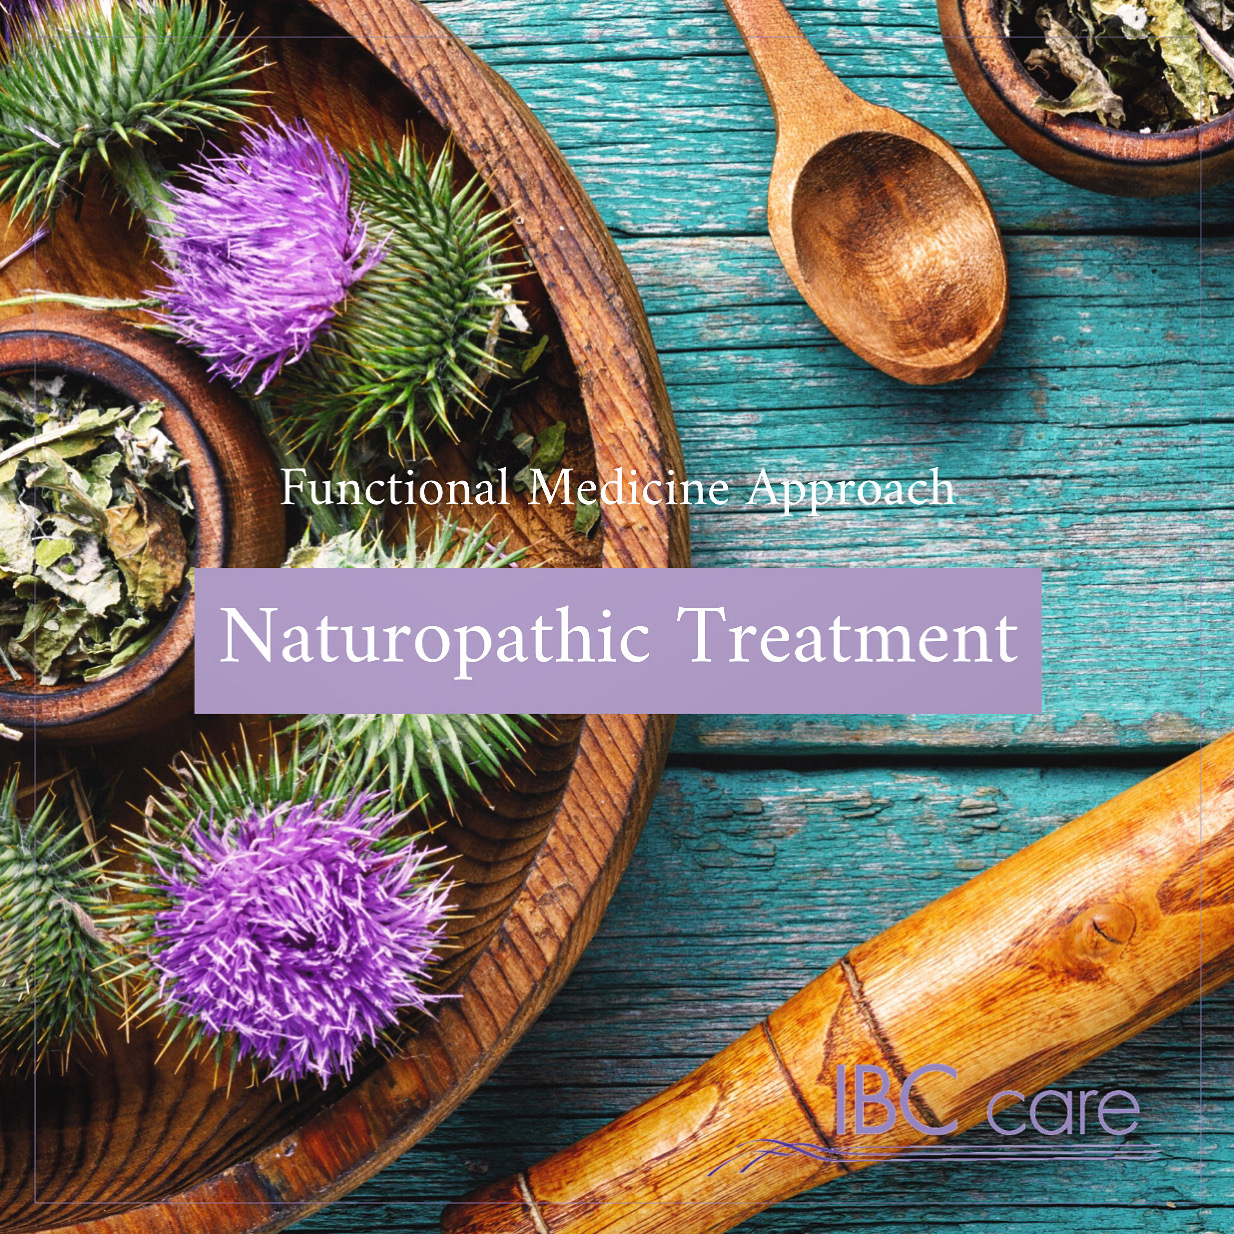 Naturopathy – Functional Medicine Approach